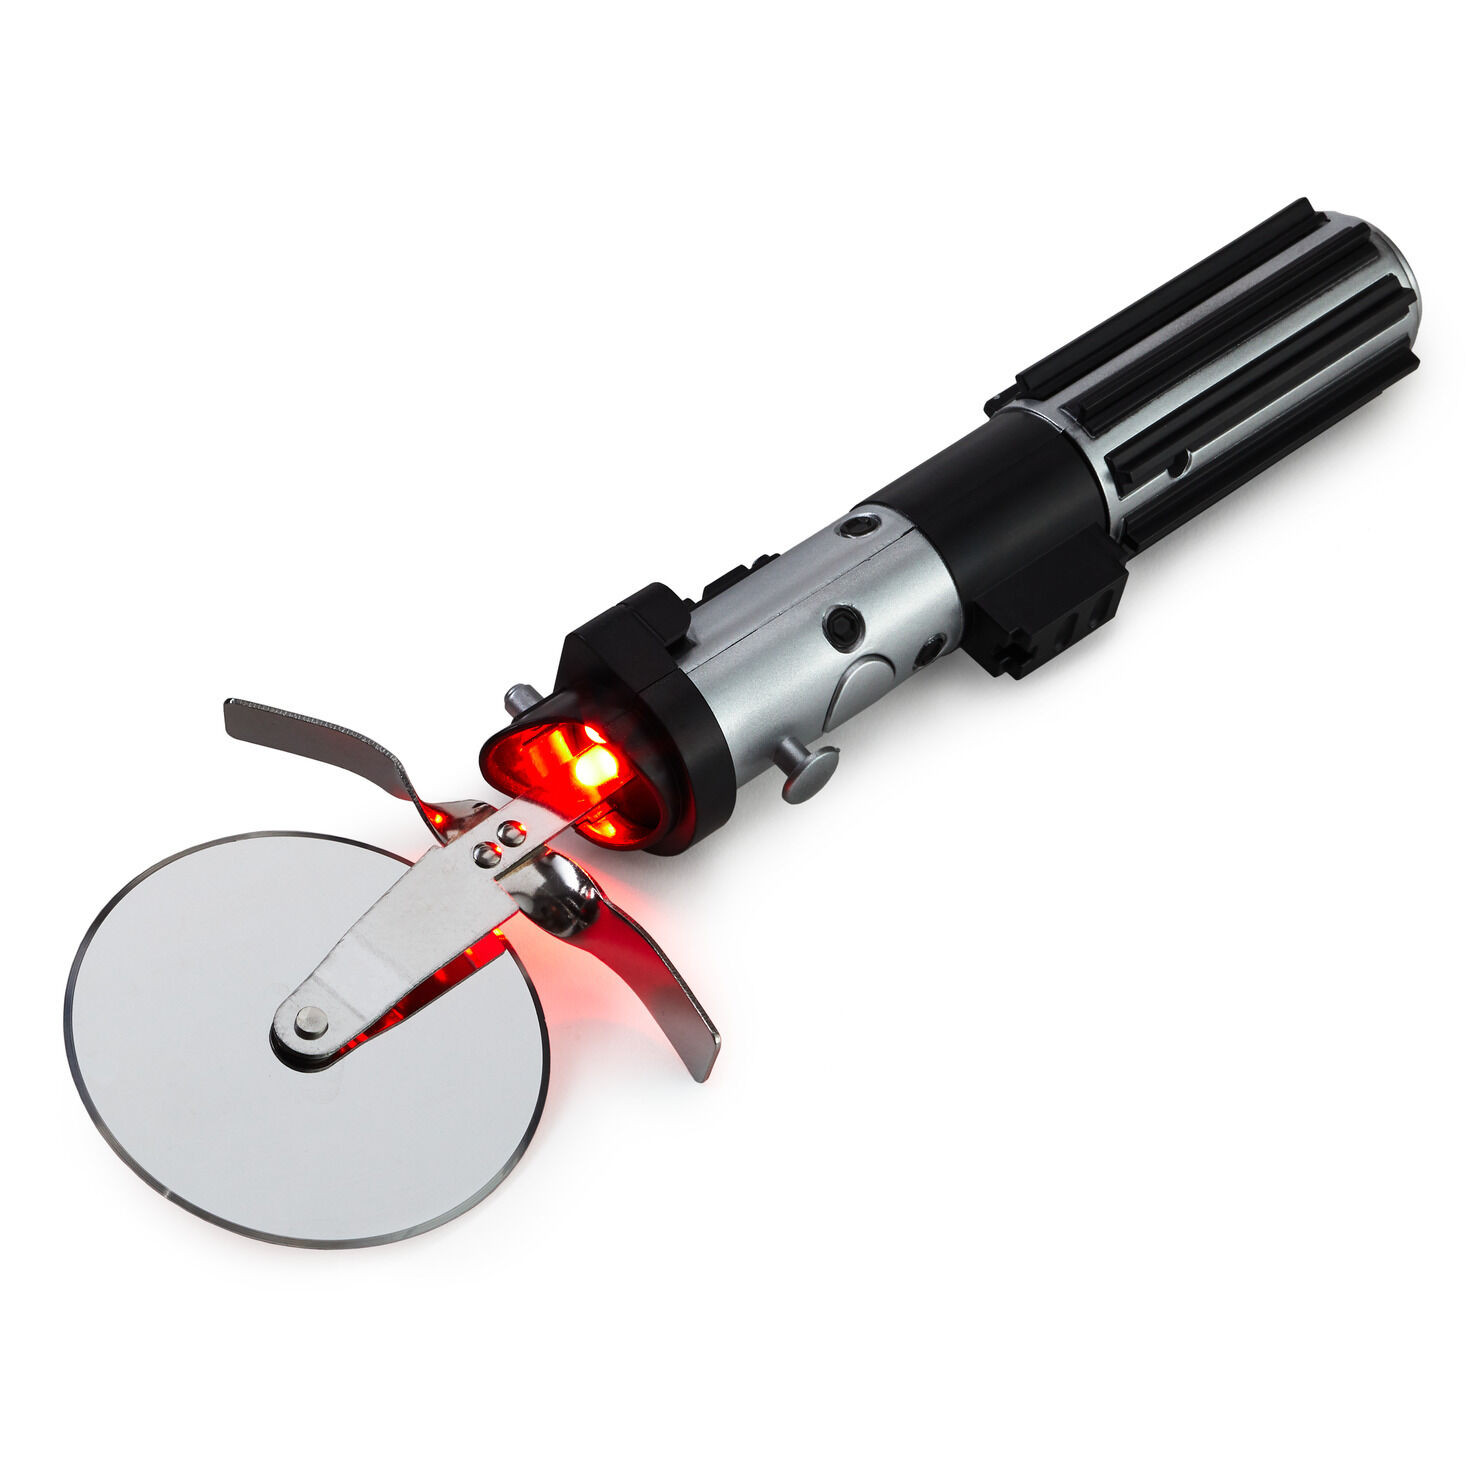 Star Wars™ Lightsaber™ Pizza Cutter With Sound for only USD 34.99 | Hallmark